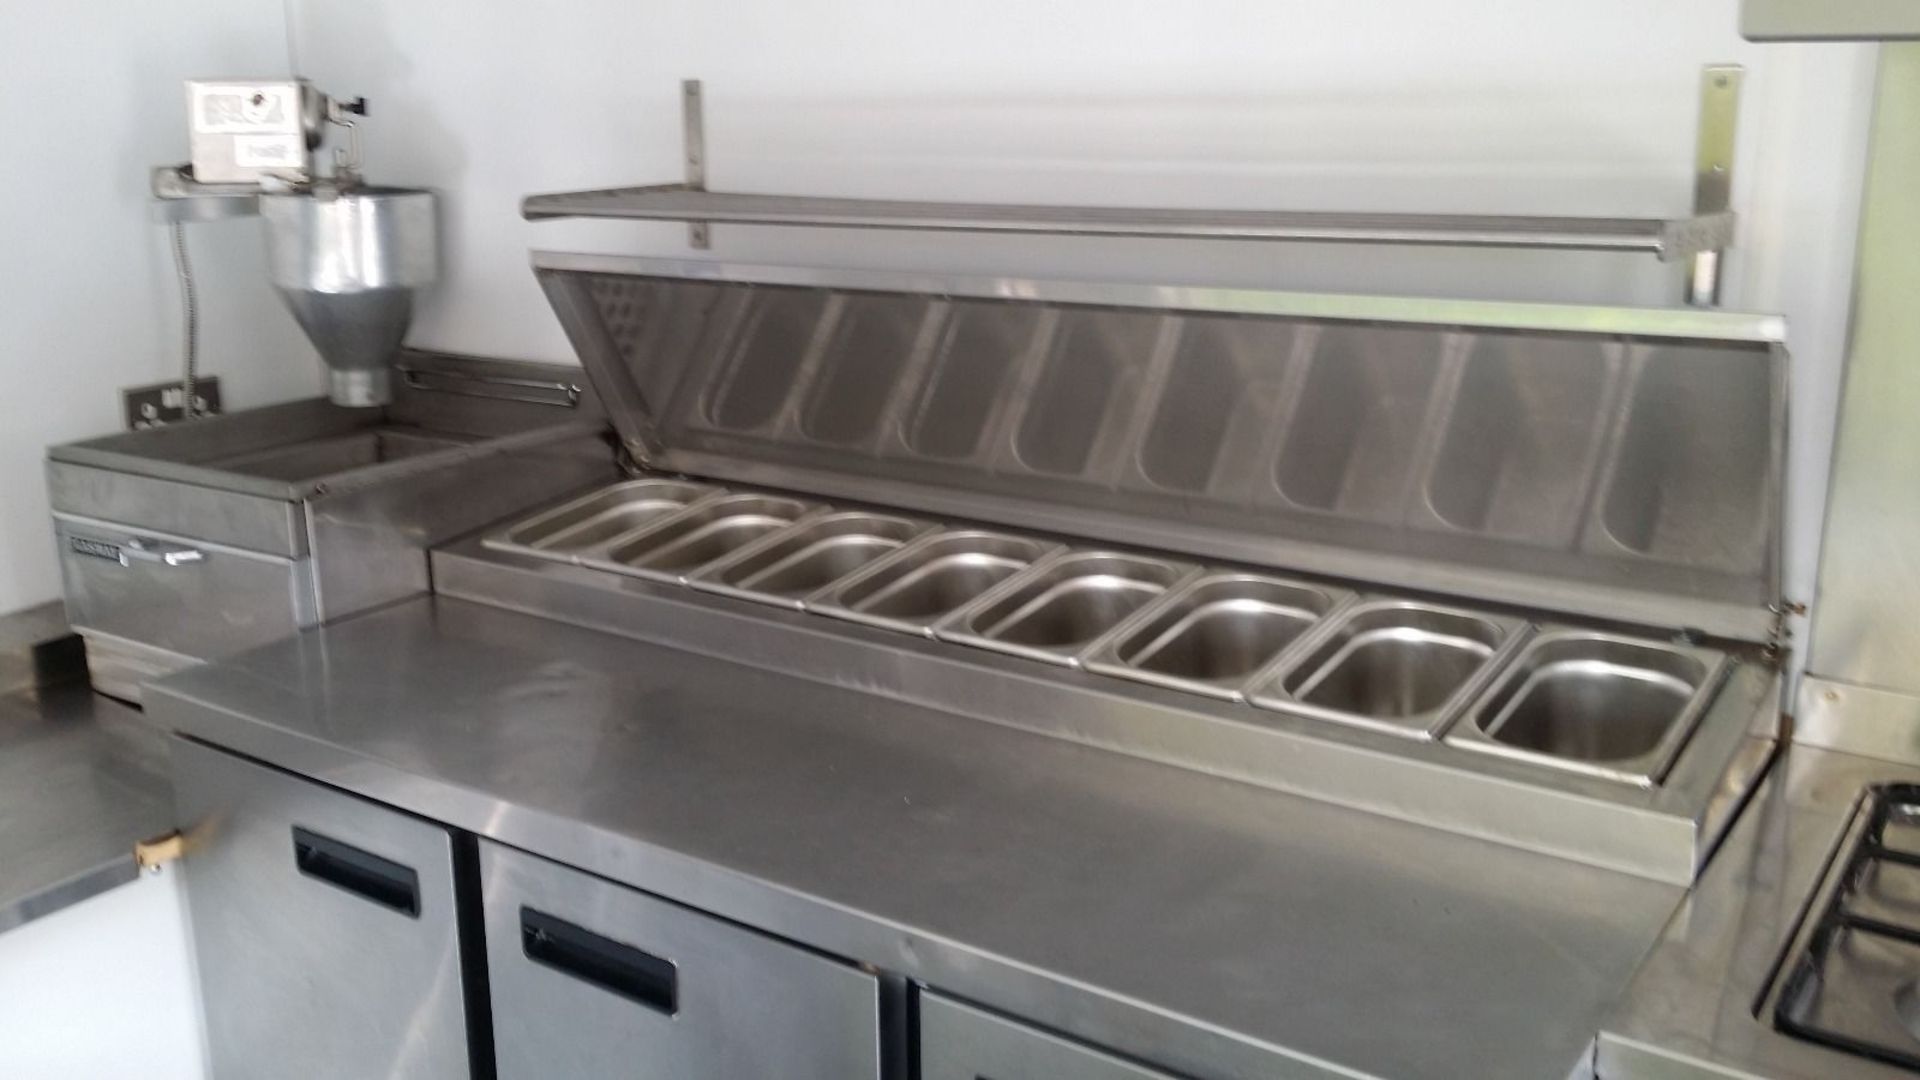 5 Star Rated A Pro Catering Unit Indespension Trailer - Image 3 of 7